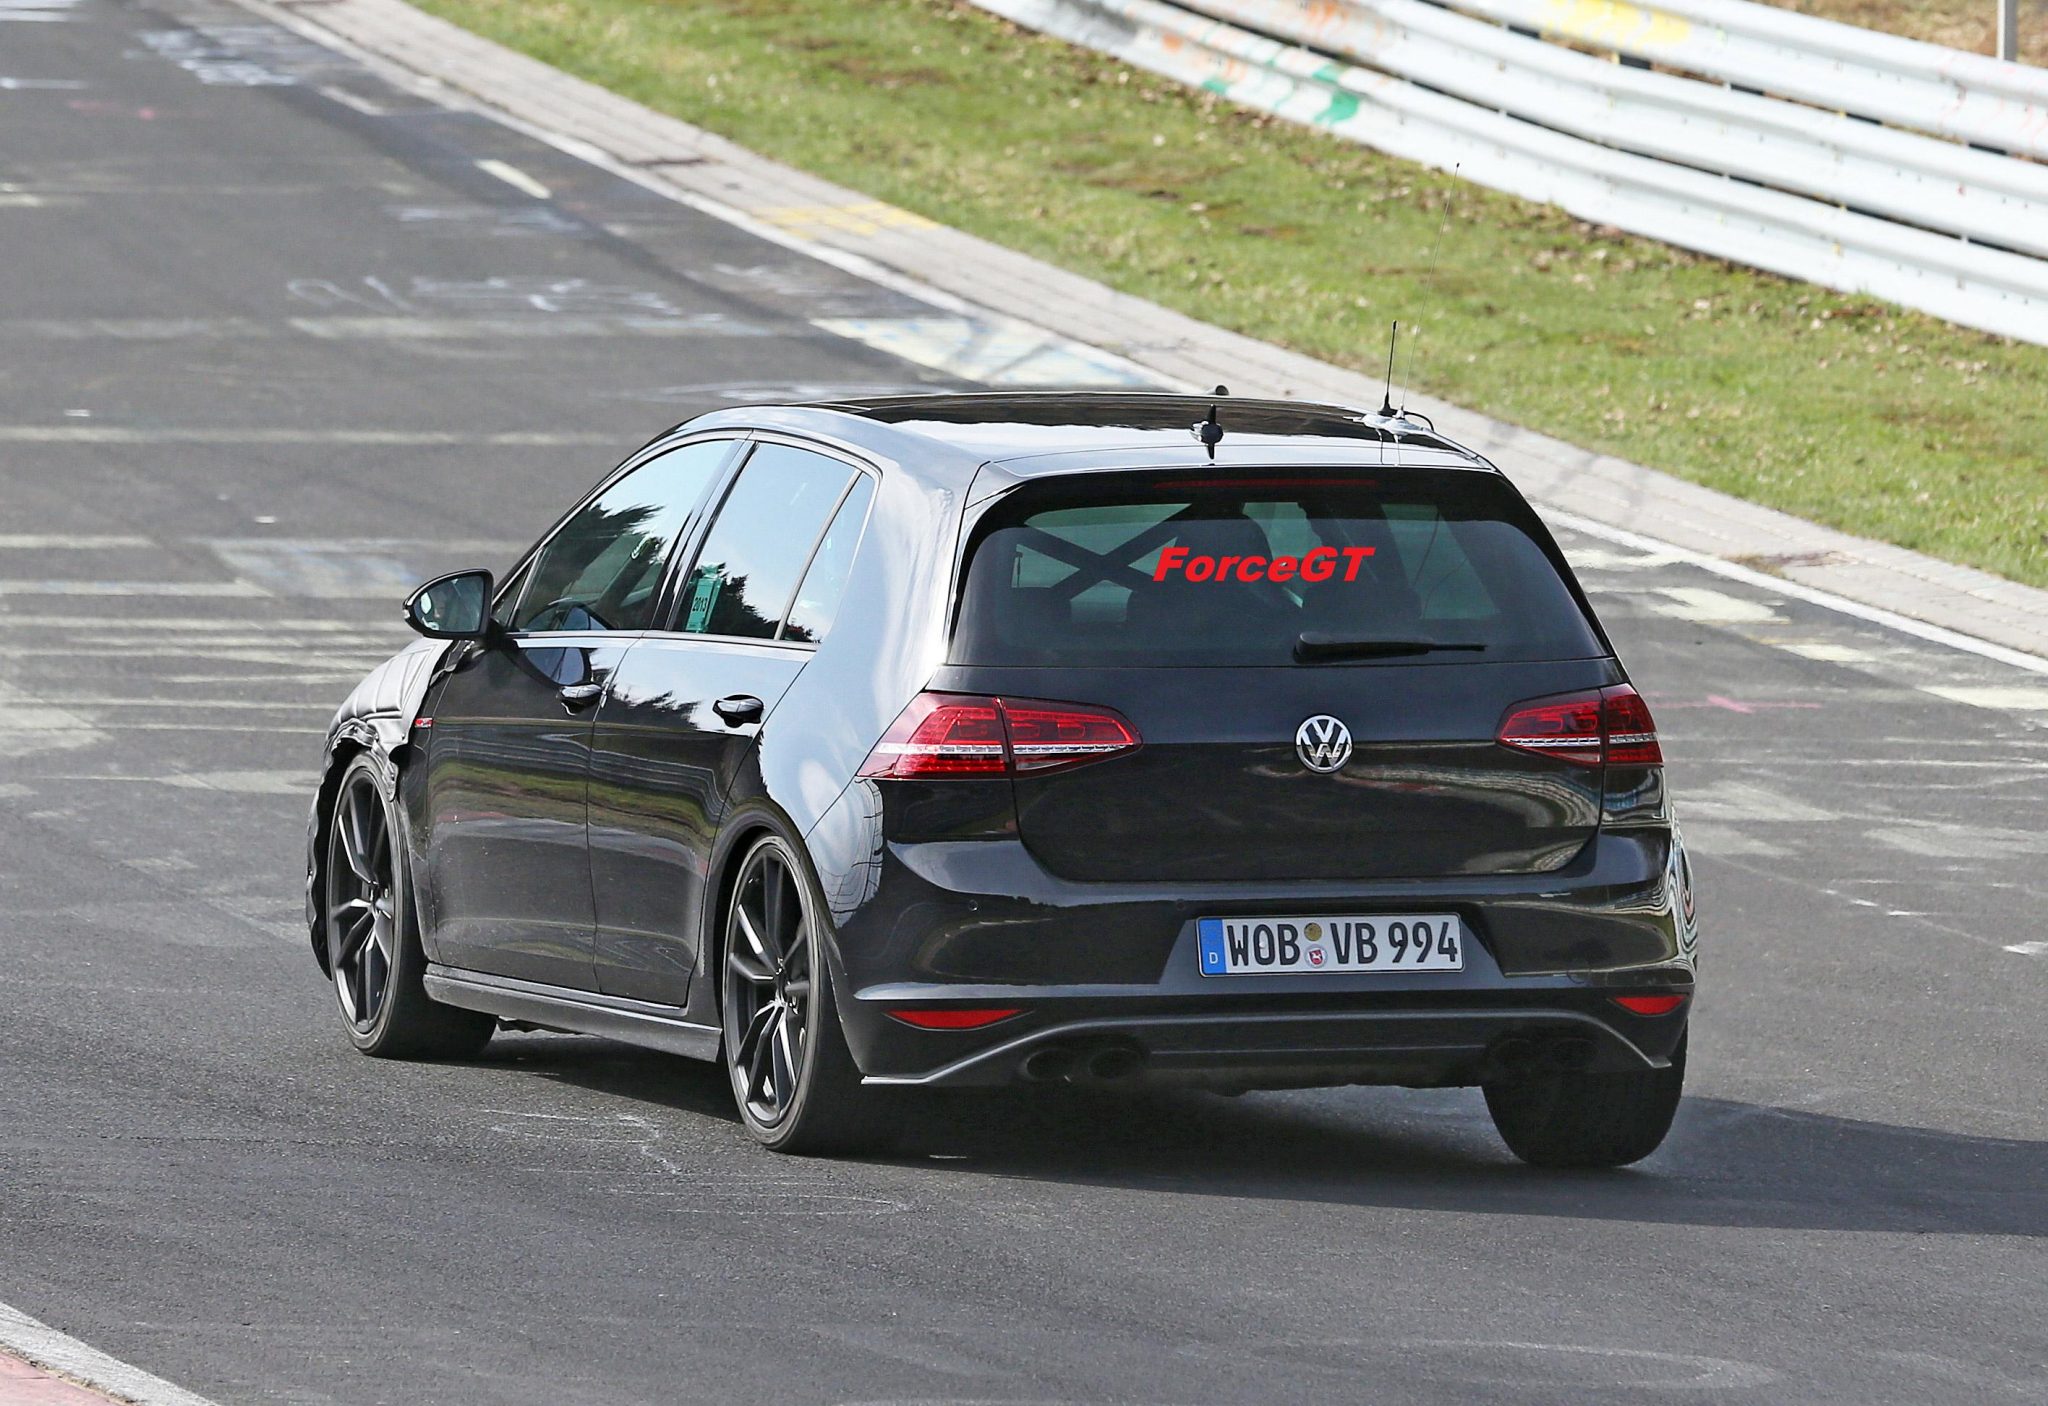 Volkswagen Cars - News: 2014 Mk7 Golf R spied on the 'Ring